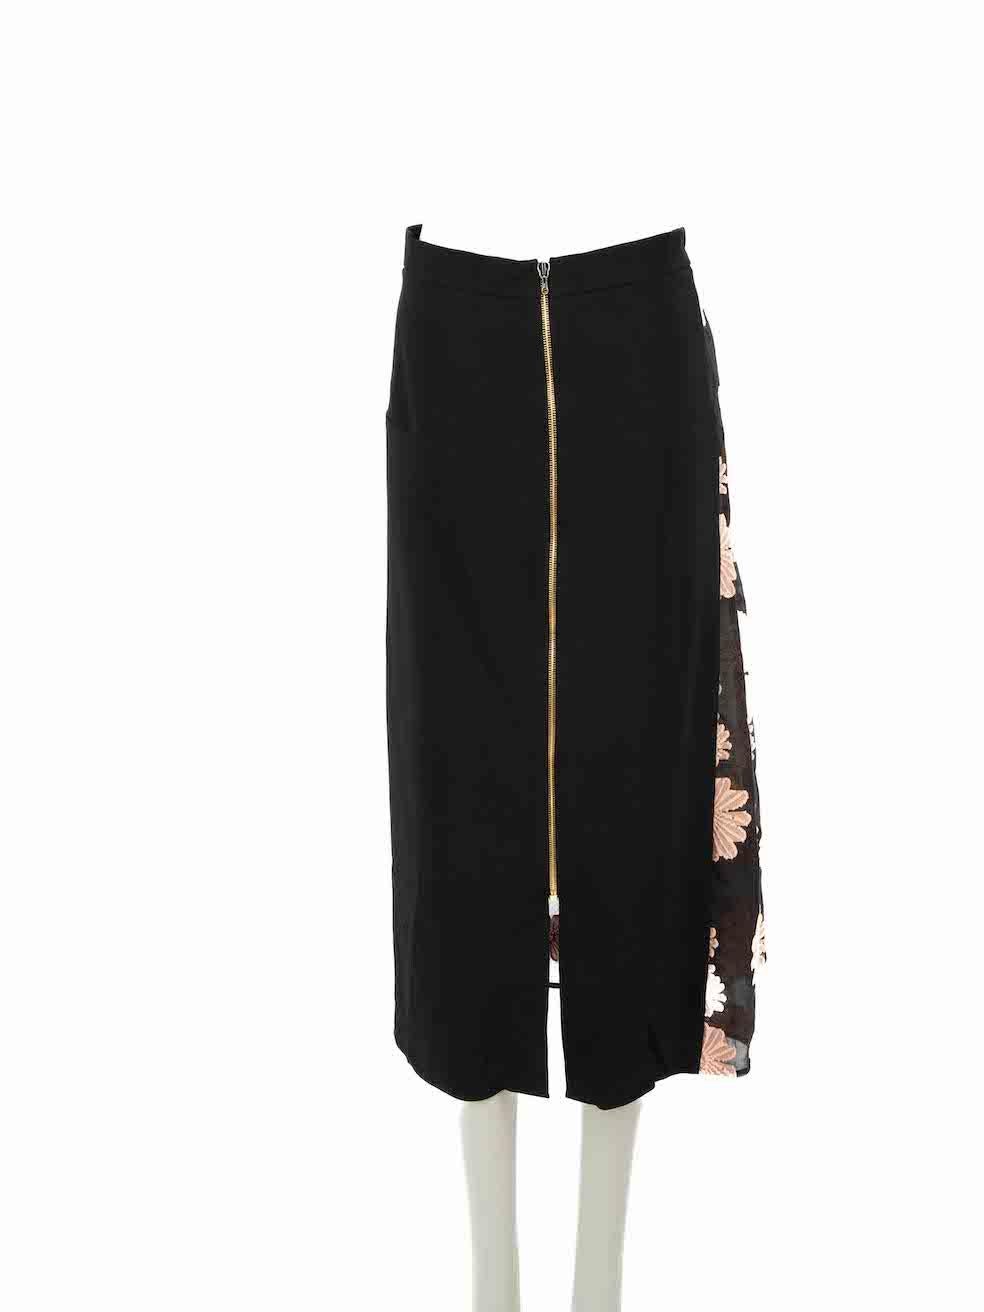 Roland Mouret Black Floral Embroidered Midi Skirt Size M In Good Condition For Sale In London, GB